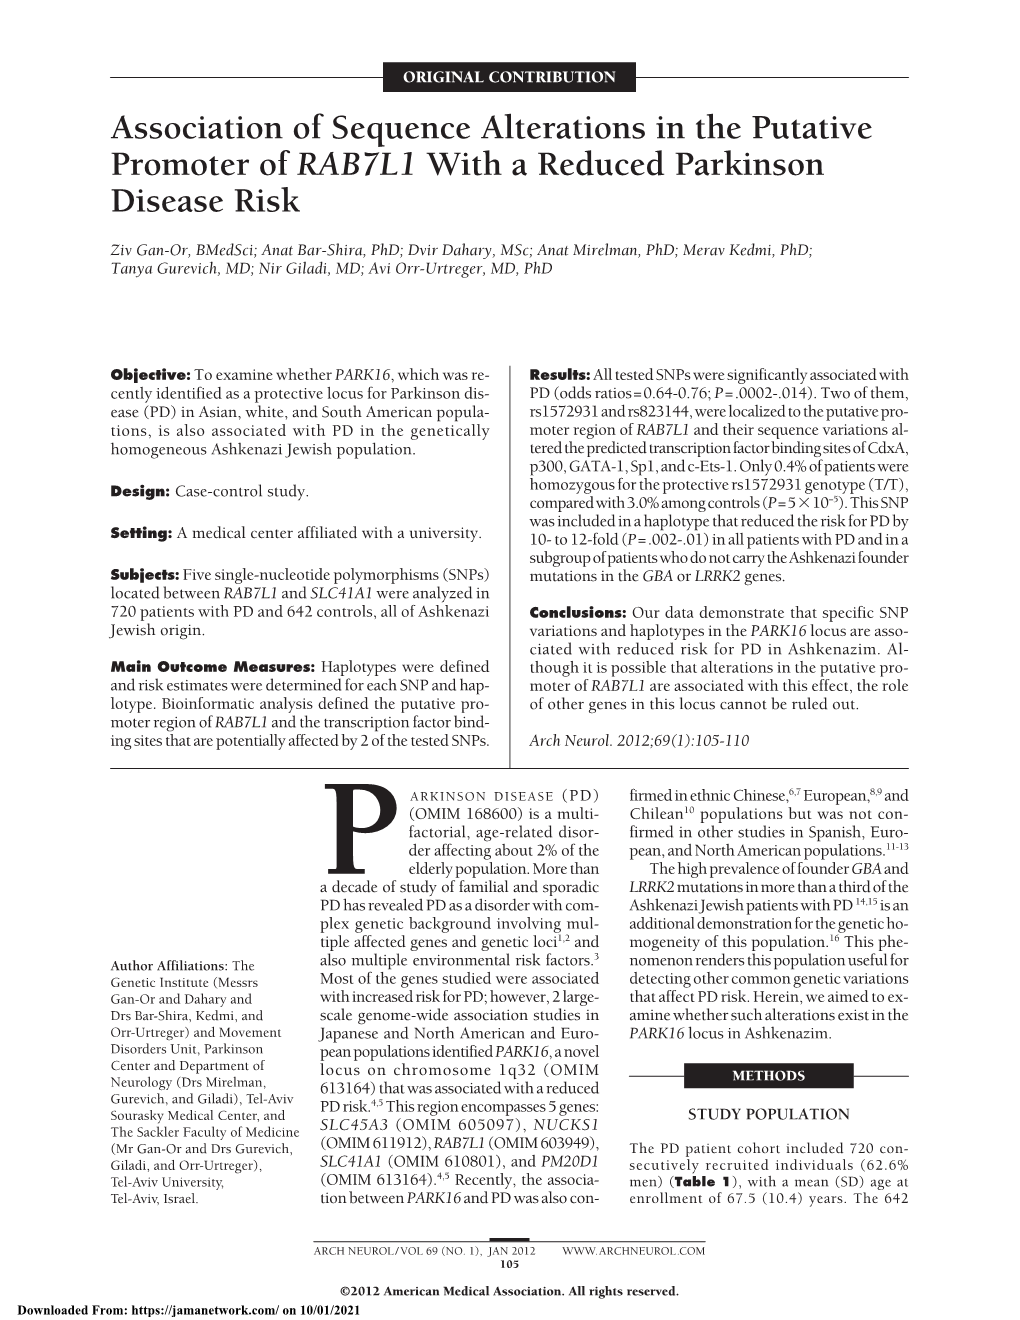 Association of Sequence Alterations in the Putative Promoter of RAB7L1 with a Reduced Parkinson Disease Risk